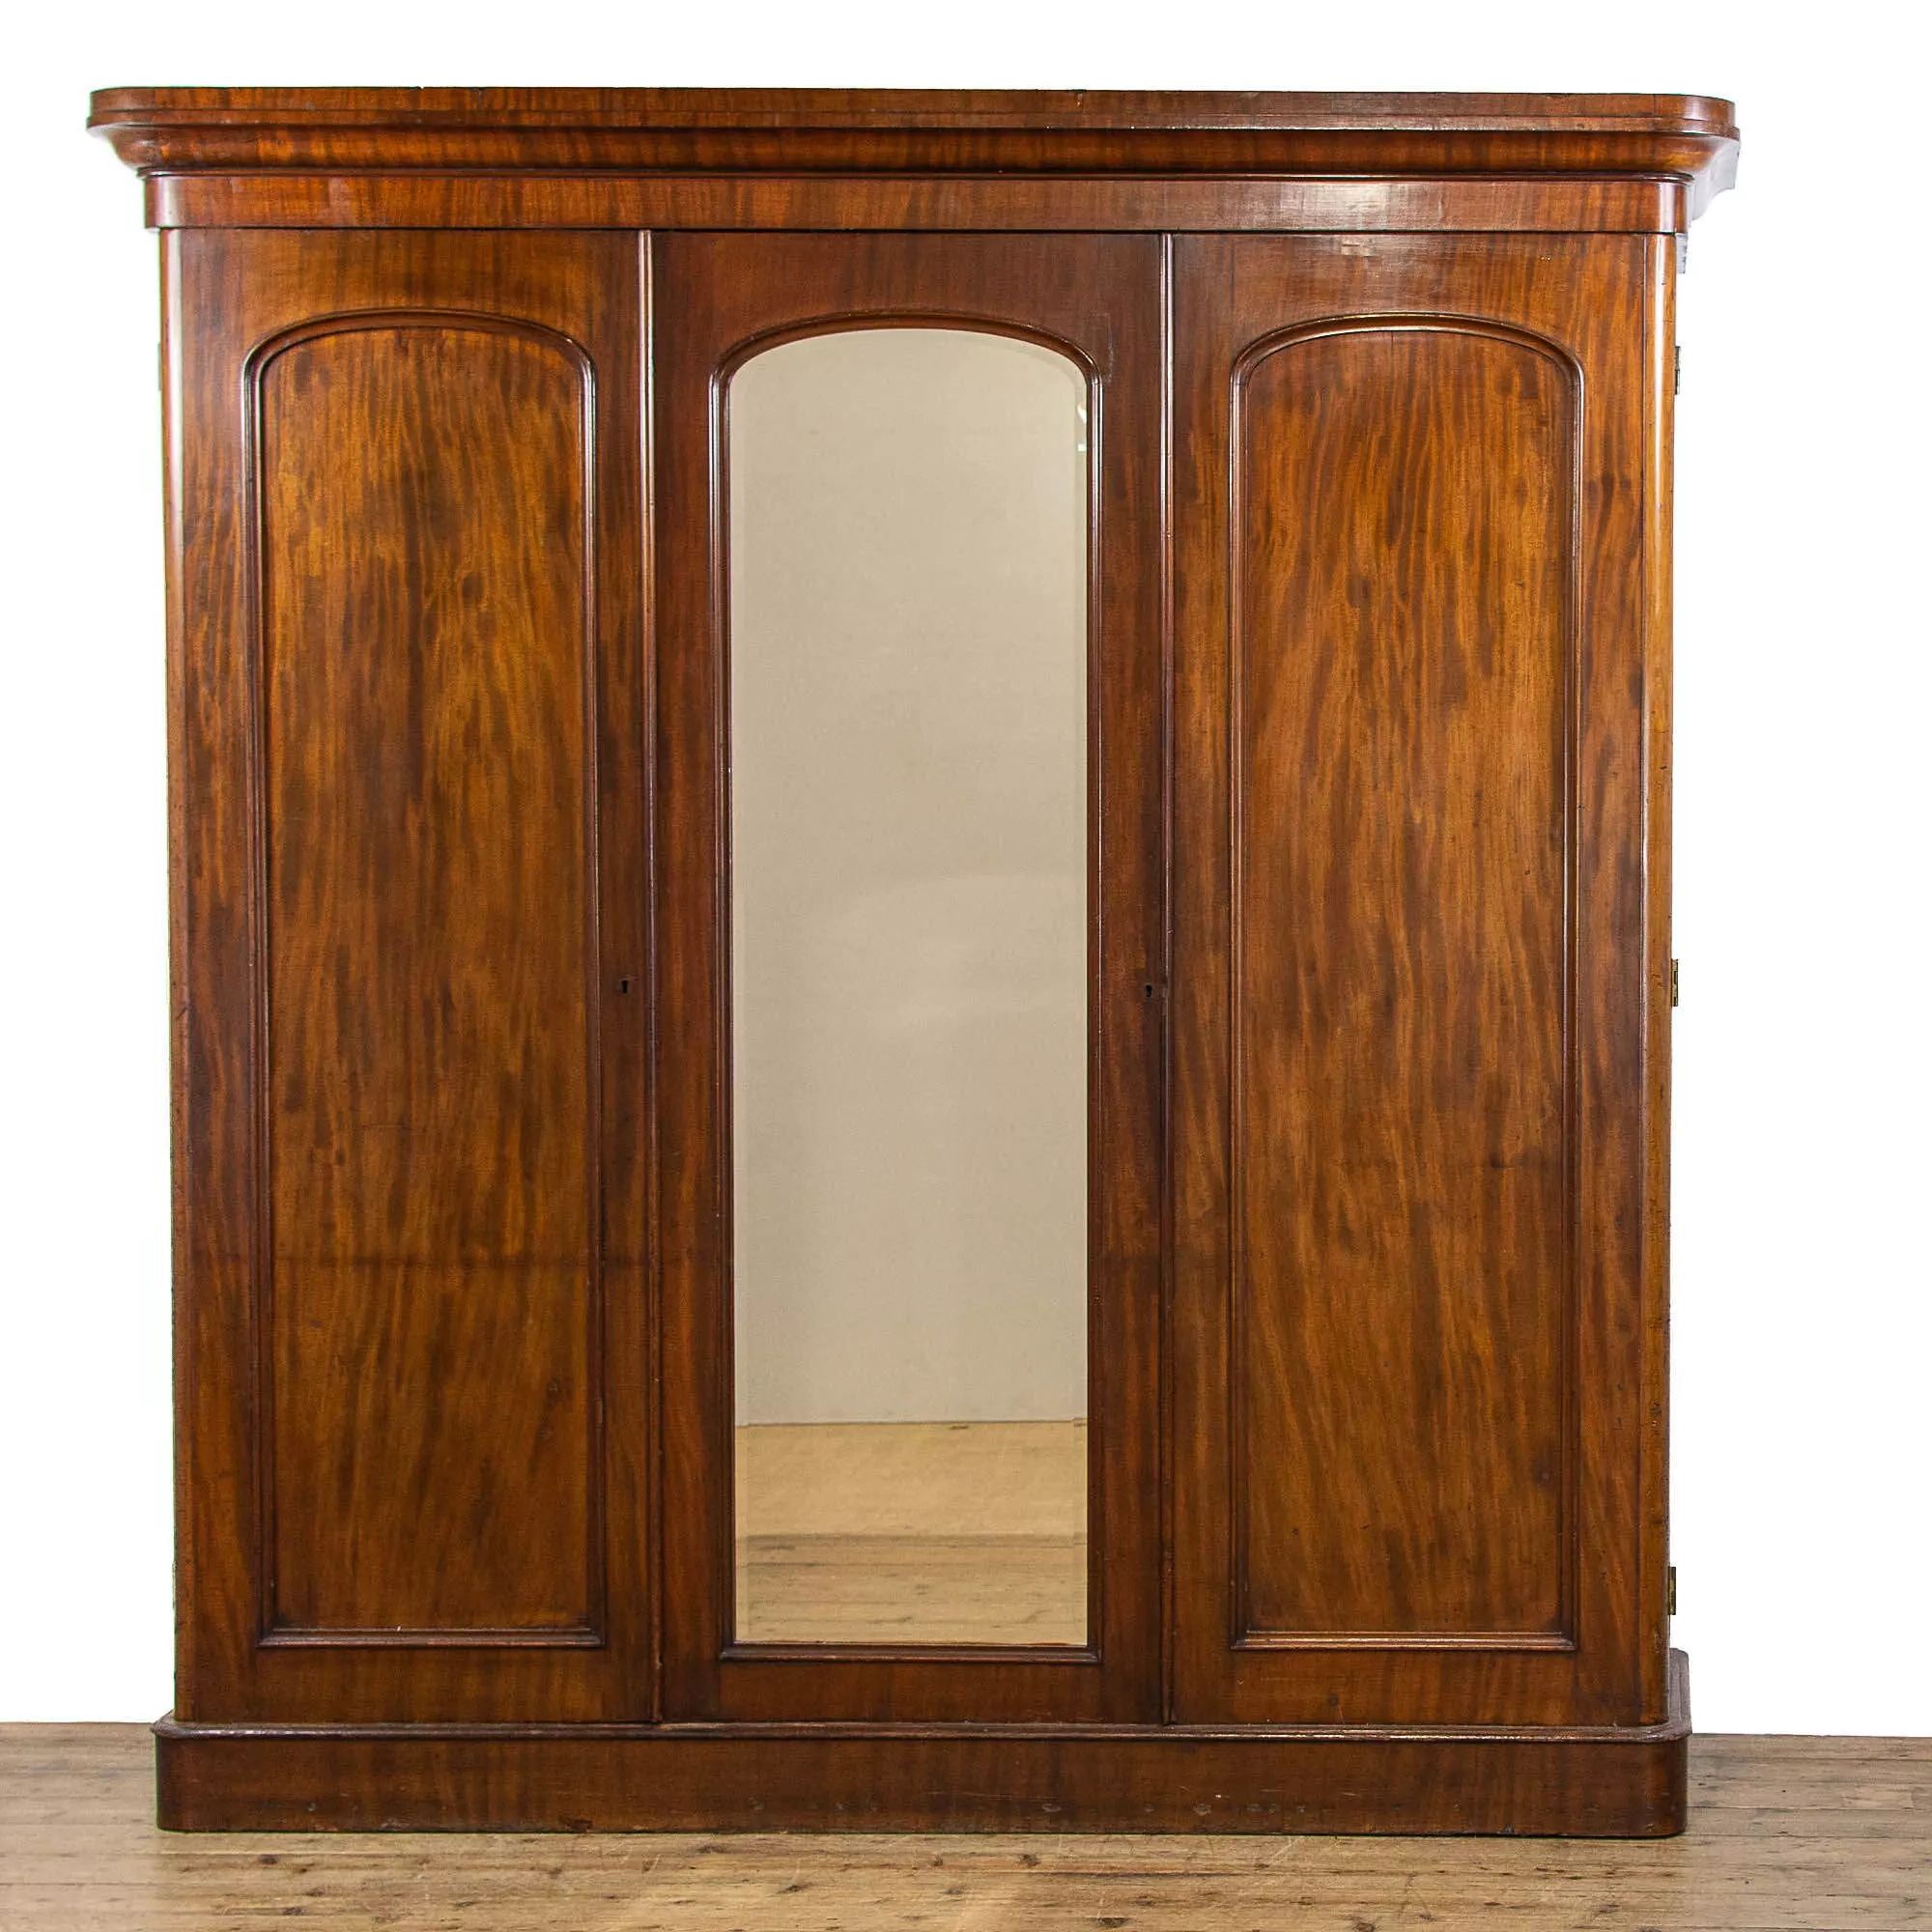 Victorian Mahogany Triple Compactum Wardrobe In Antique Wardrobes & Armoires Inside Victorian Wardrobes For Sale (View 11 of 20)